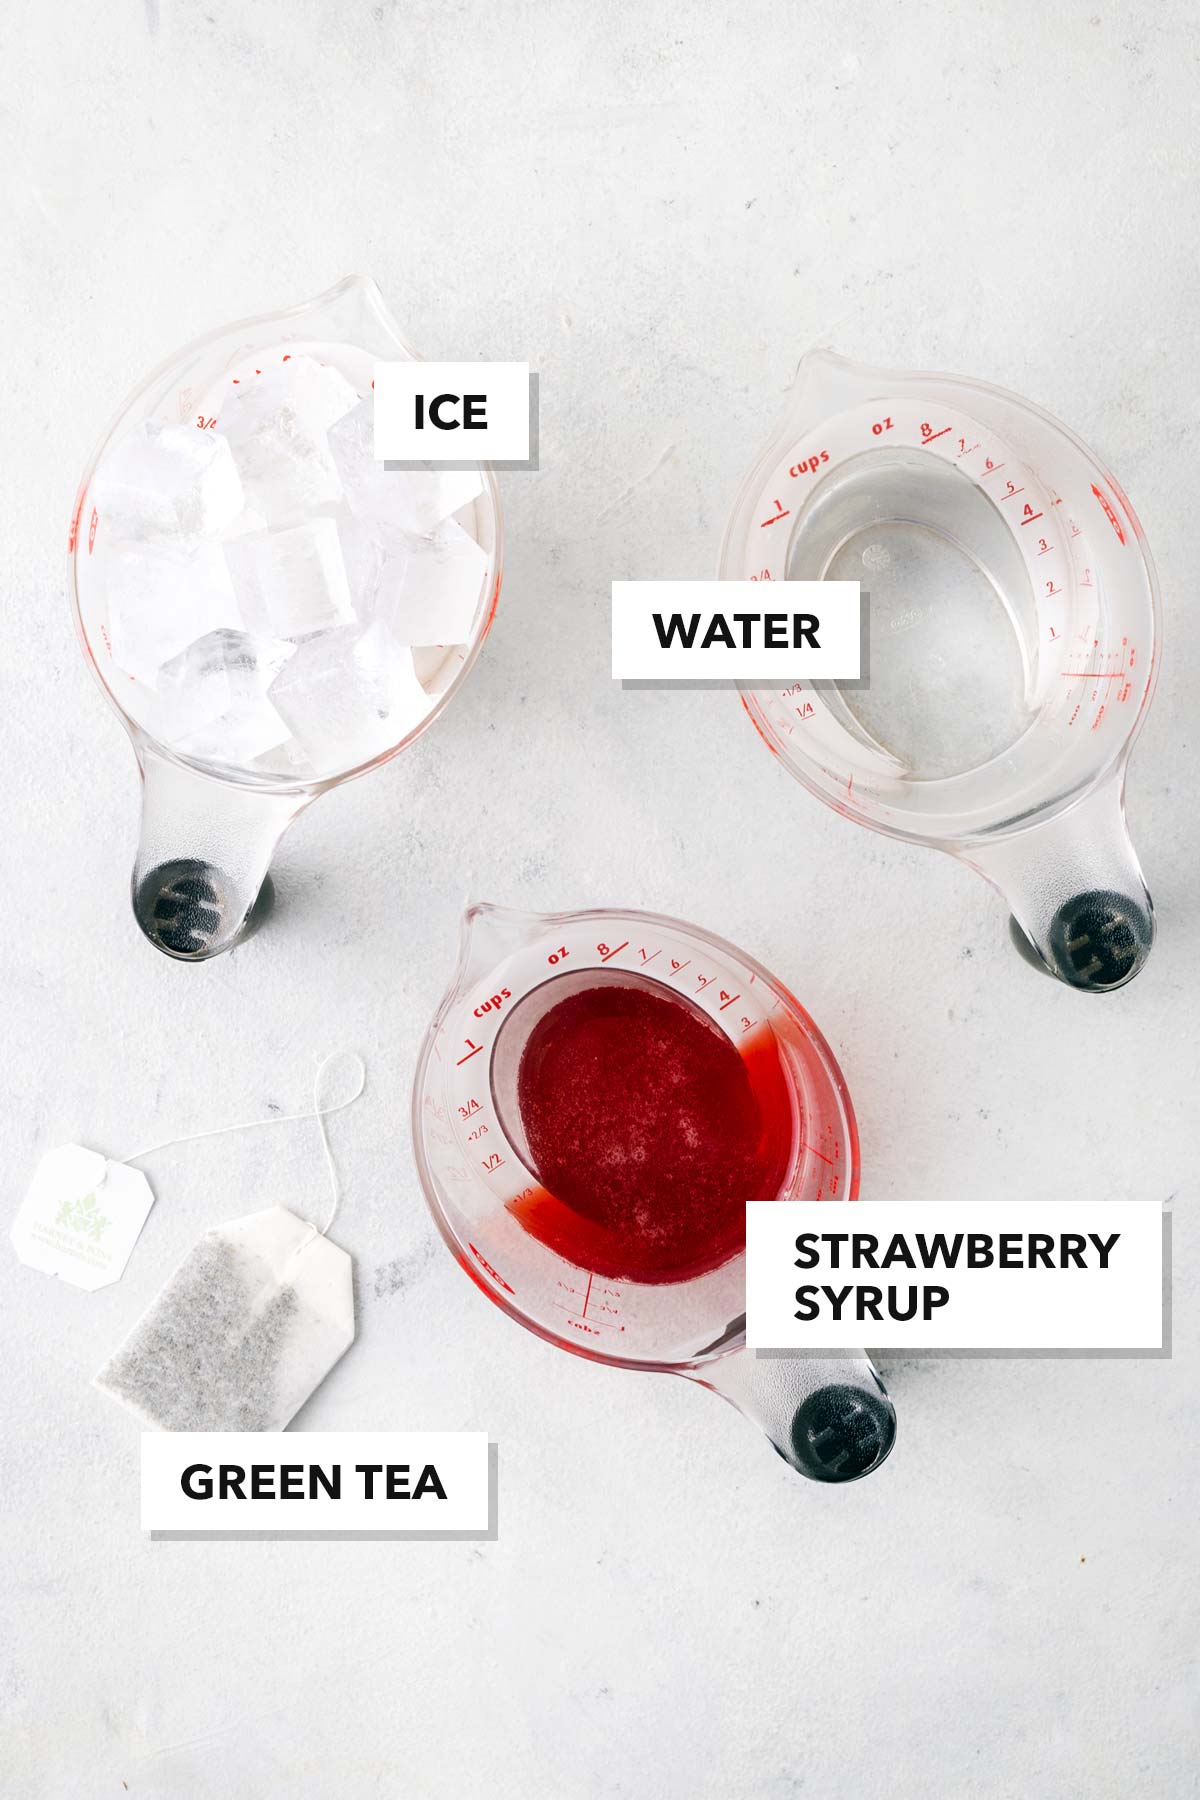 Strawberry Iced Tea ingredients measured in cups and labeled on a table.